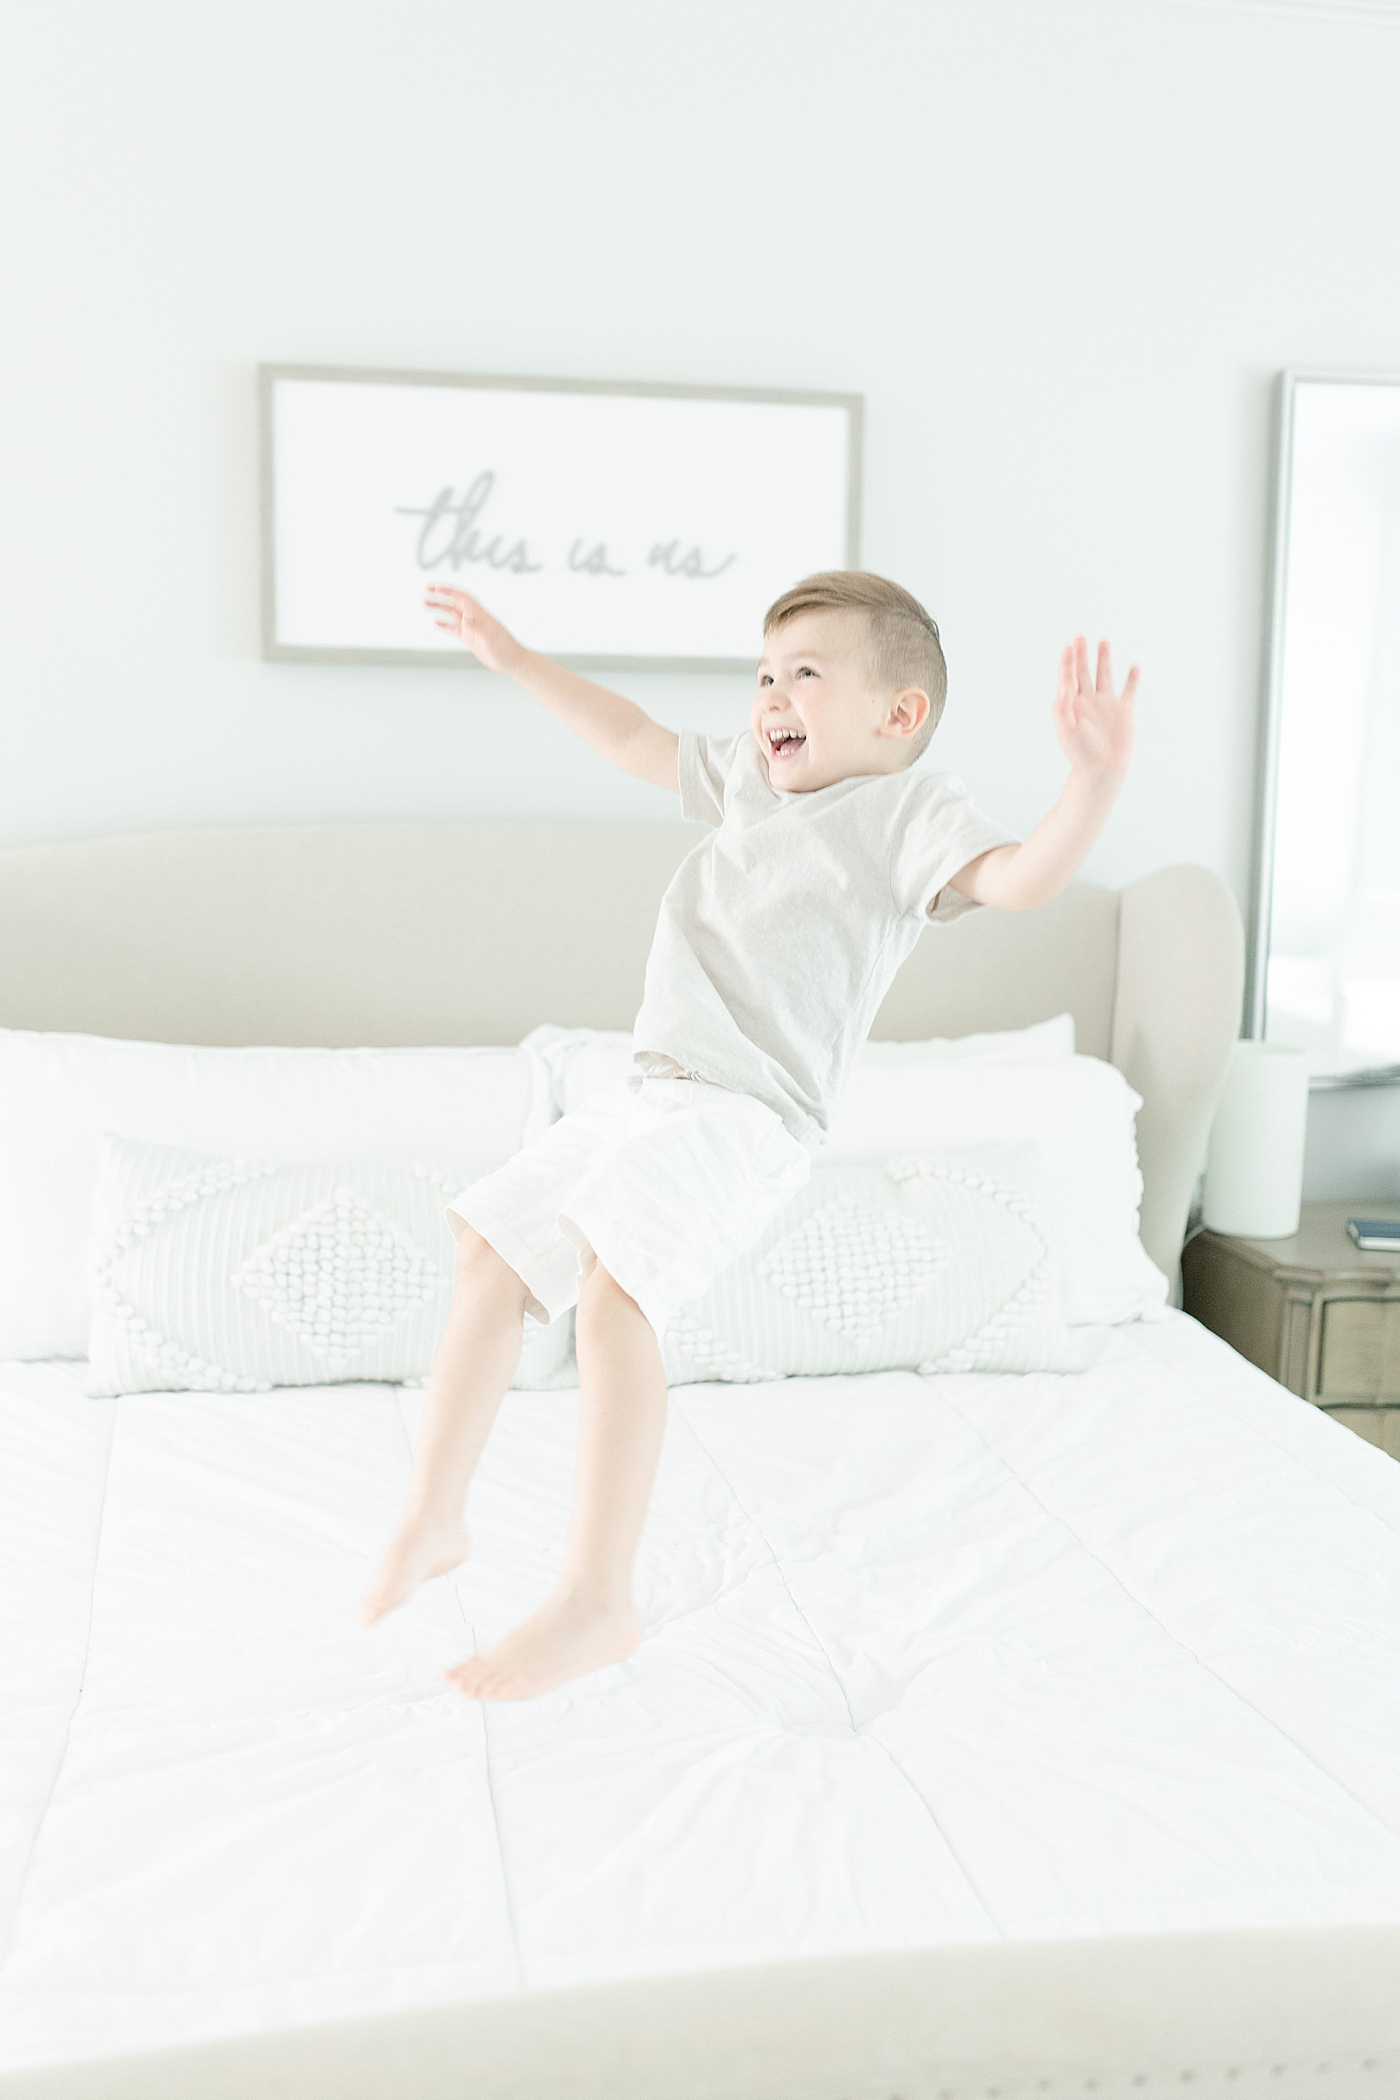 Toddler boy jumping on bed during family photoshoot. Photo by Little Sunshine Photography